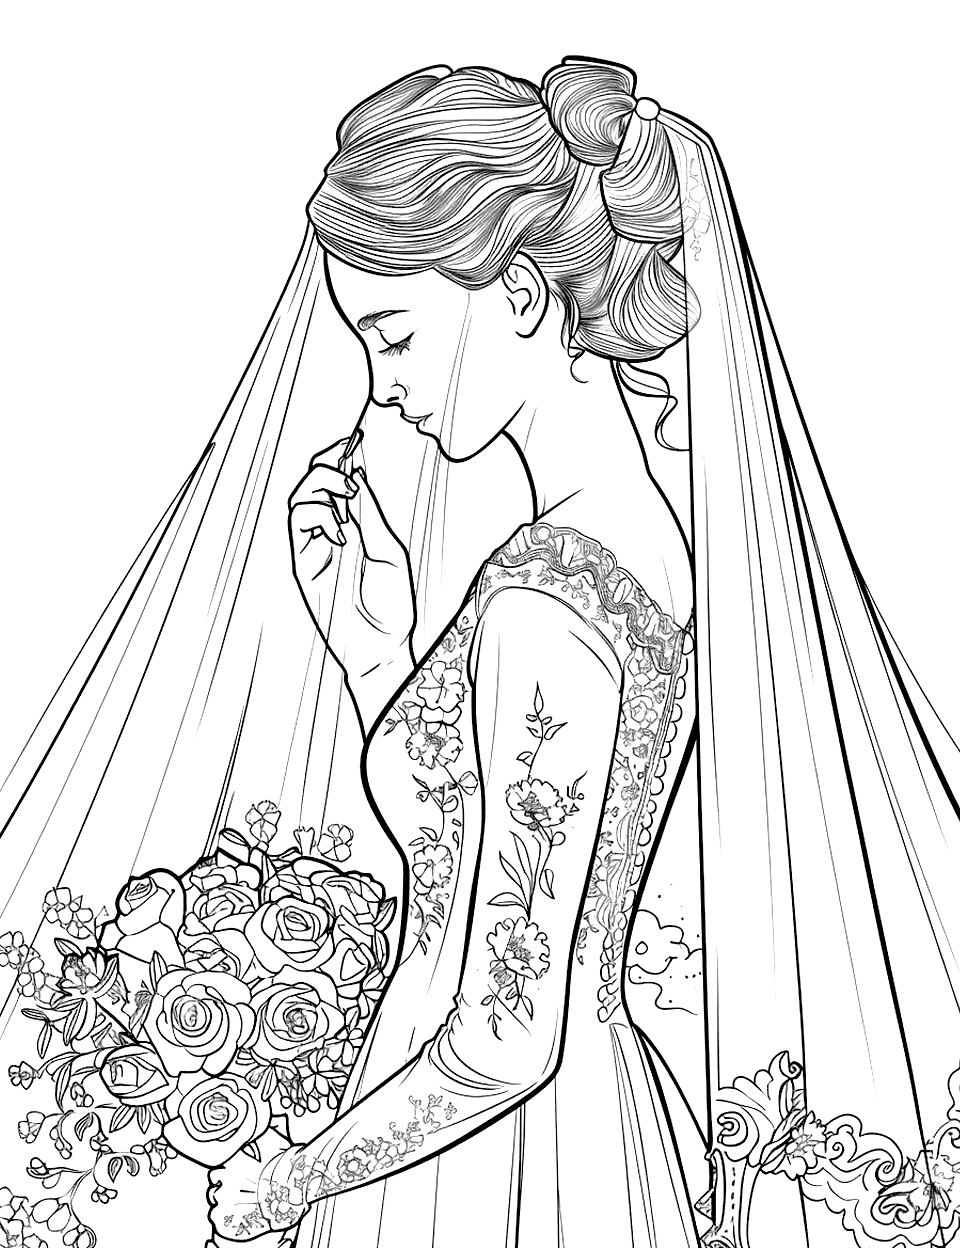 Bridal Veil Elegance Wedding Coloring Page - A close-up of a bride and her delicate veil.